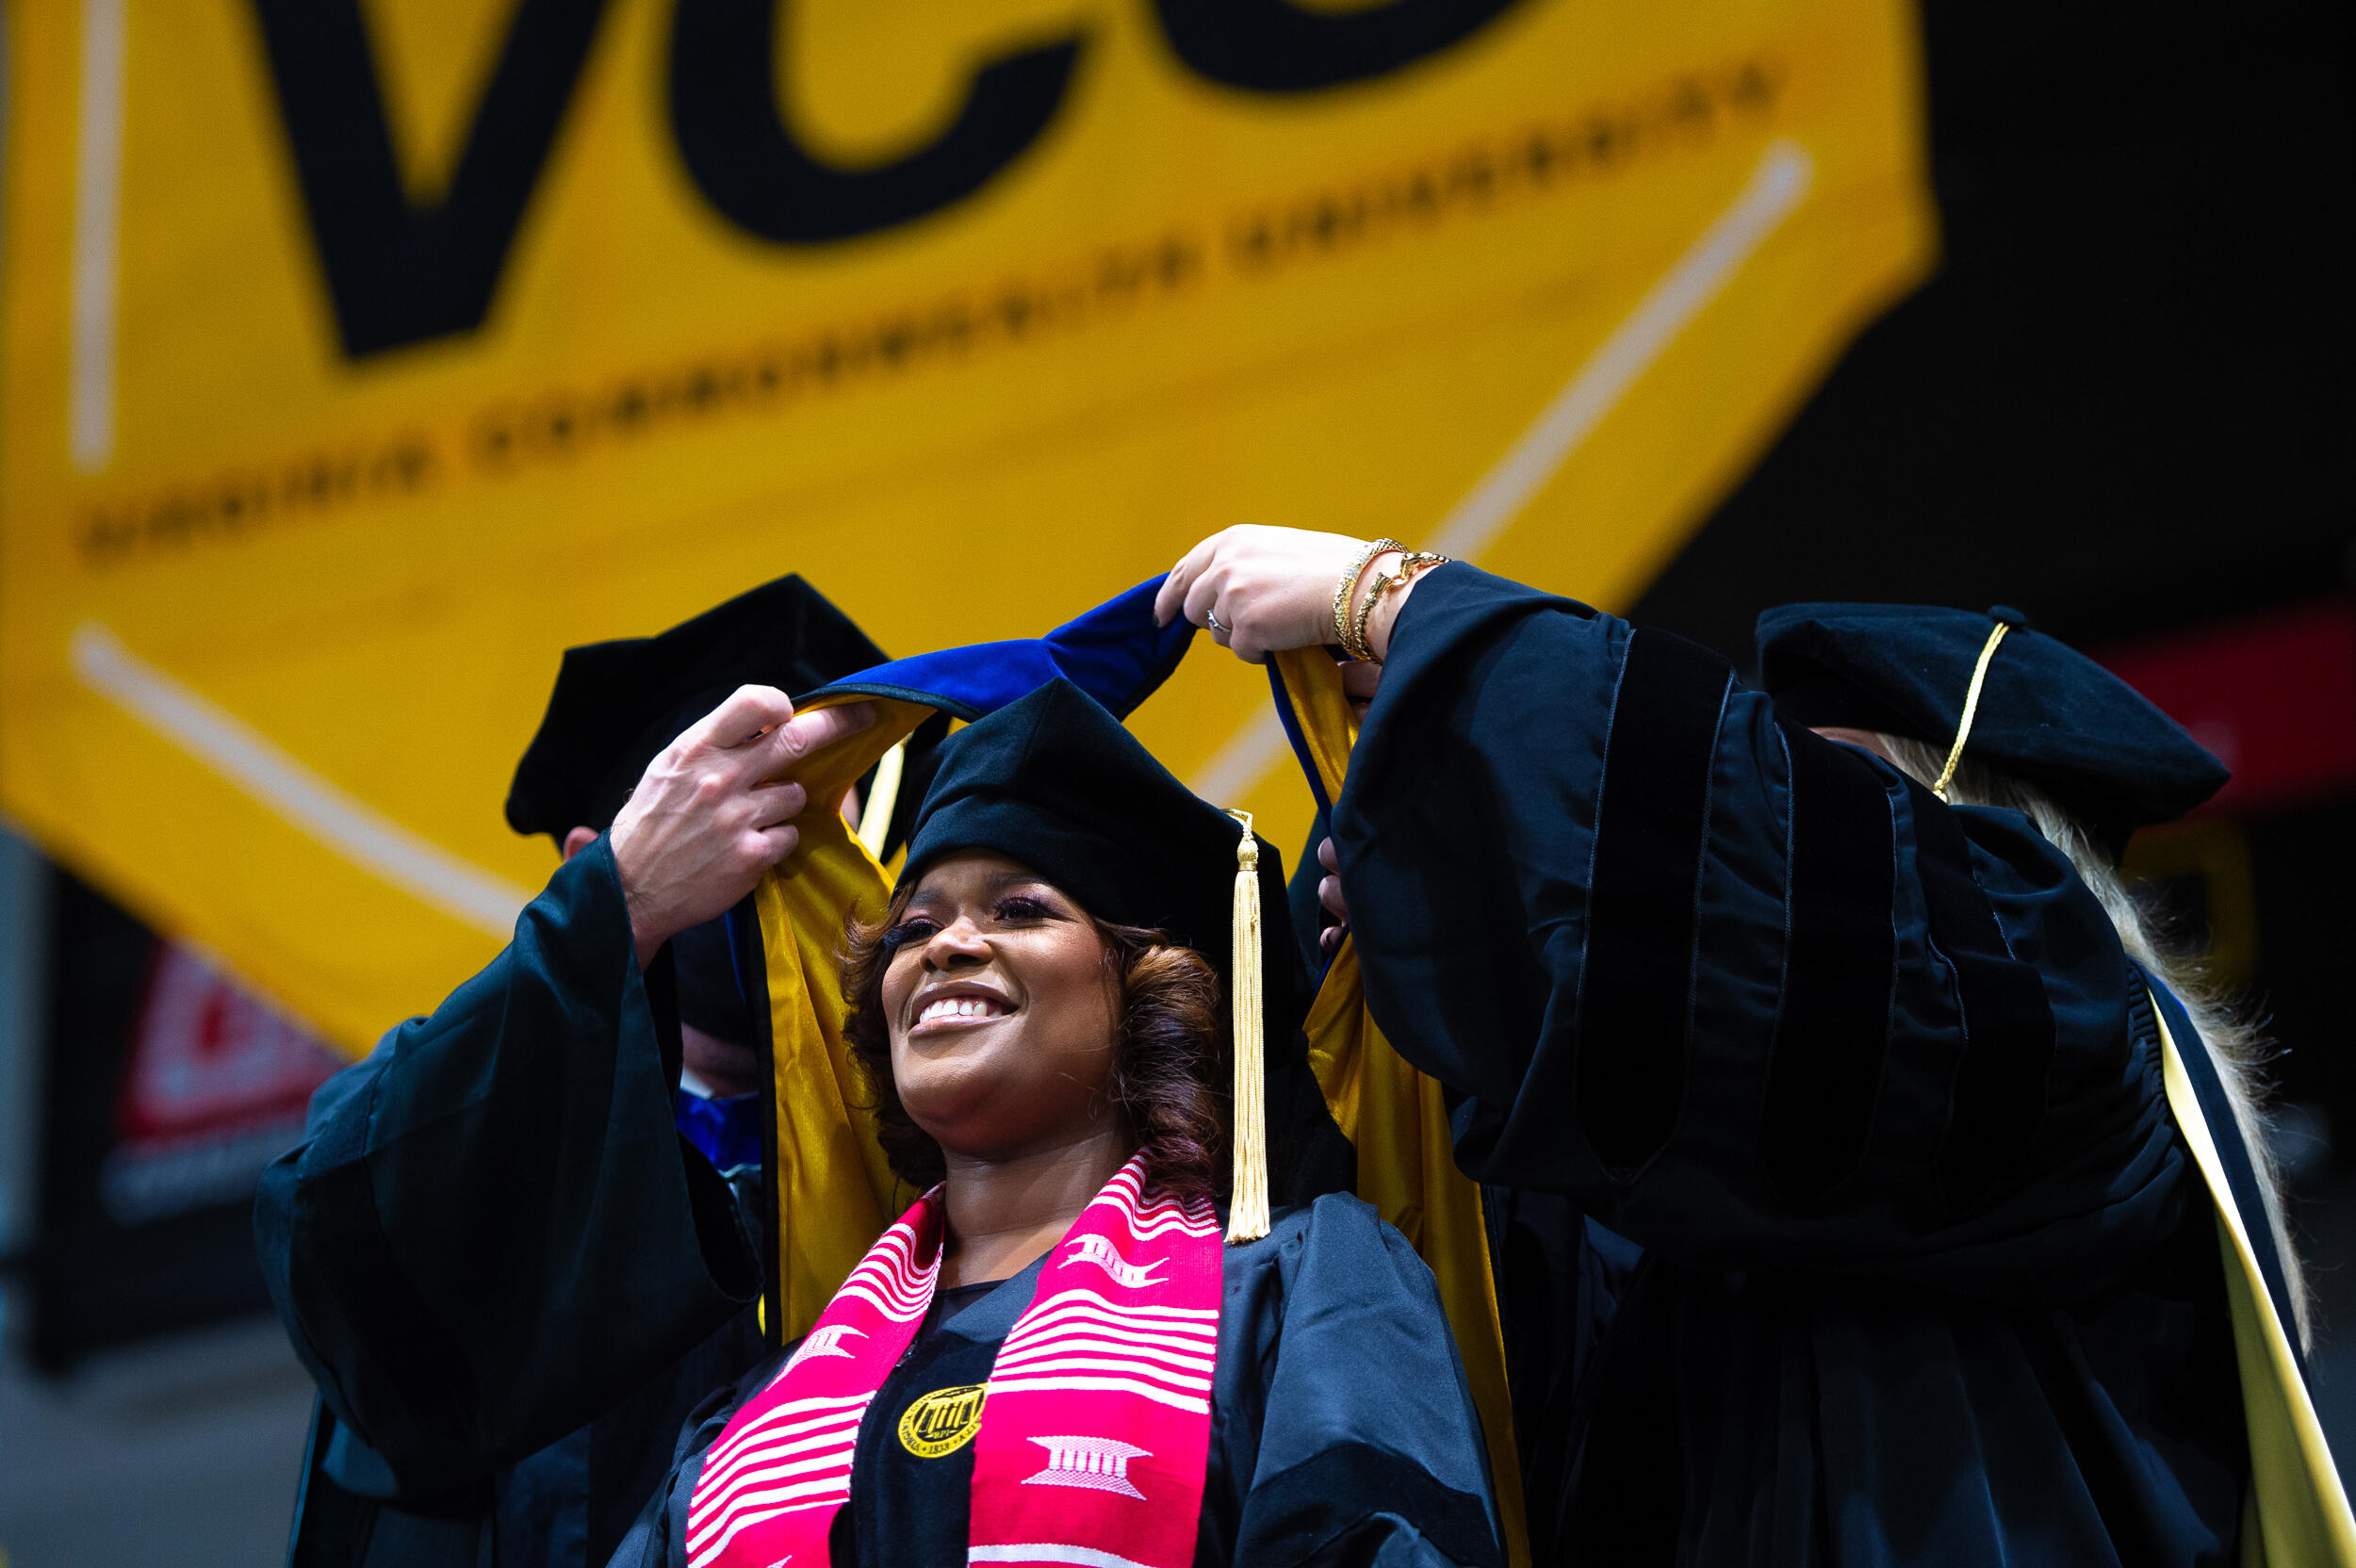 A doctoral student receives a hood at a hooding ceremony, as two professors lift a piece of fabric over their head on the stage in front of a large VCU banner.